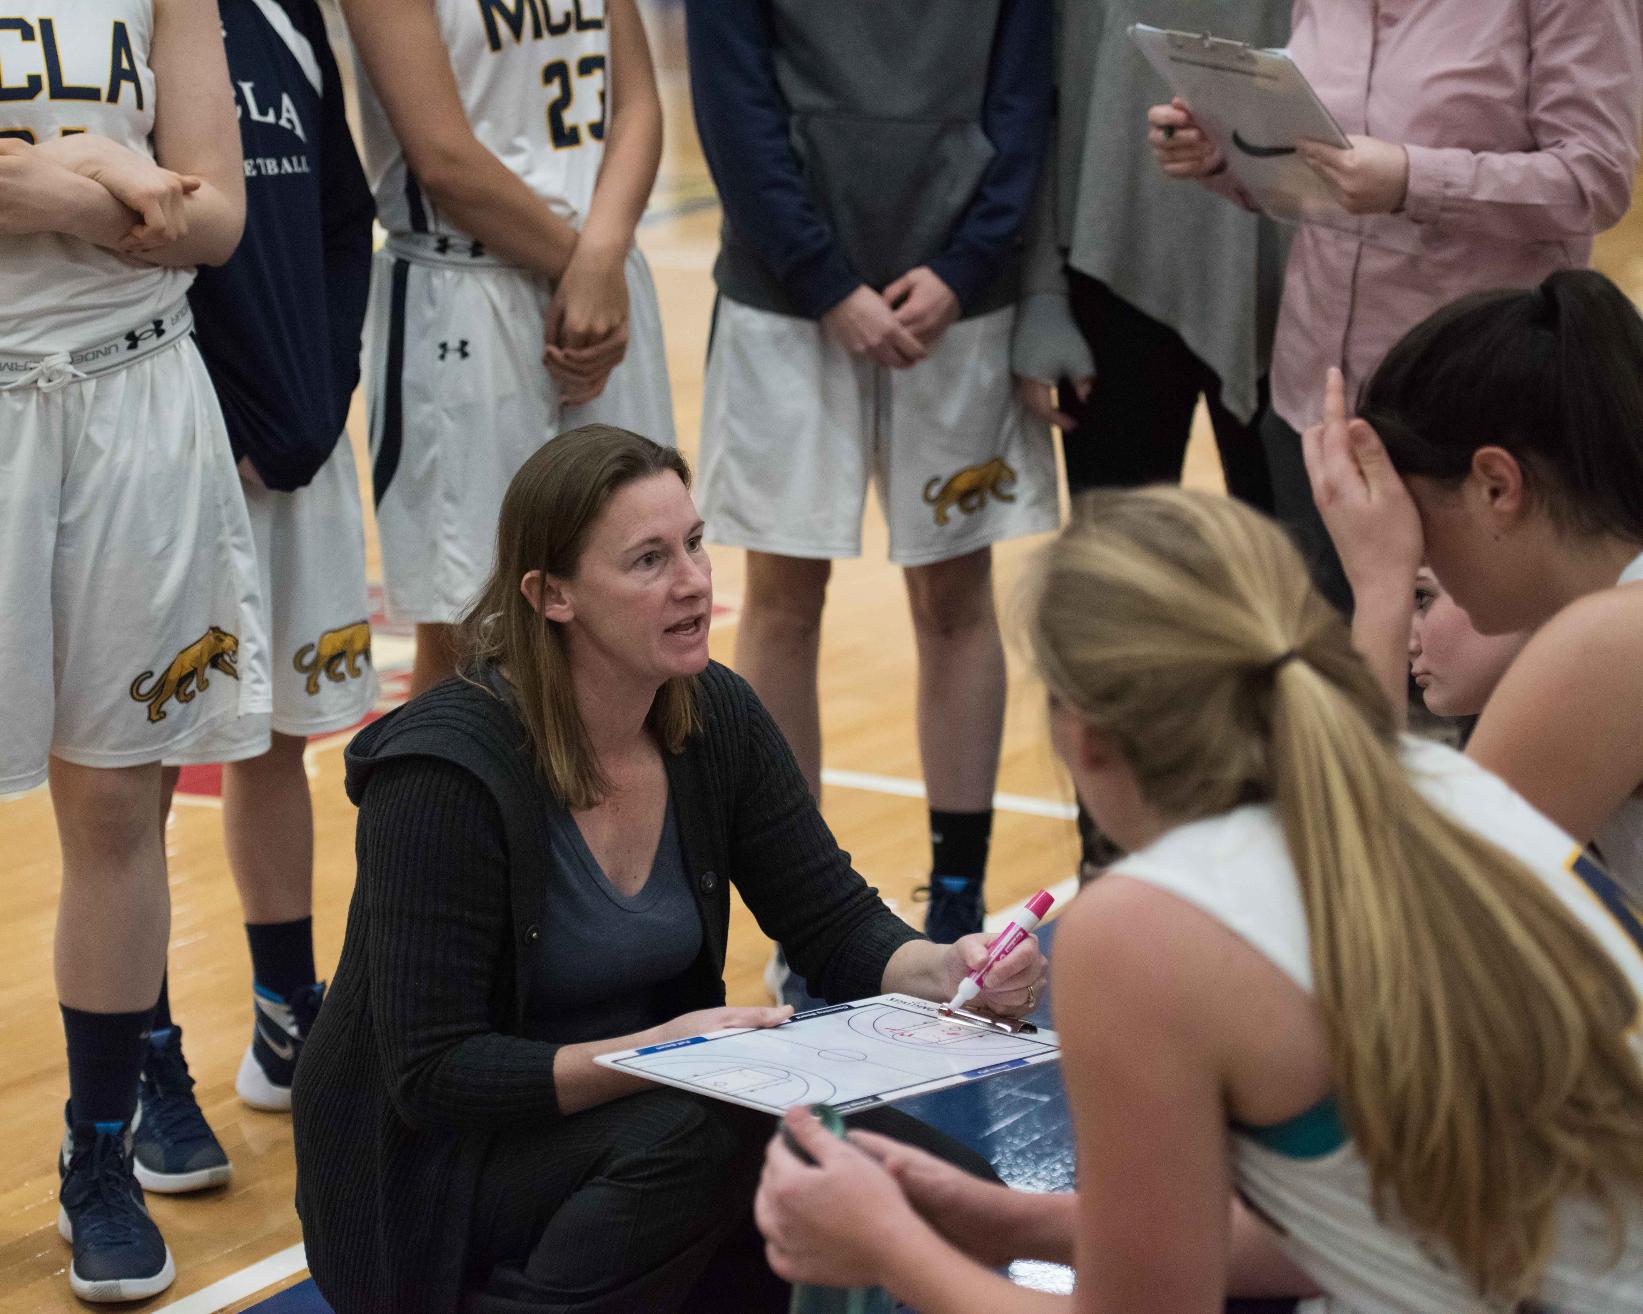 Women's Basketball to hold summer clinic June 27-30